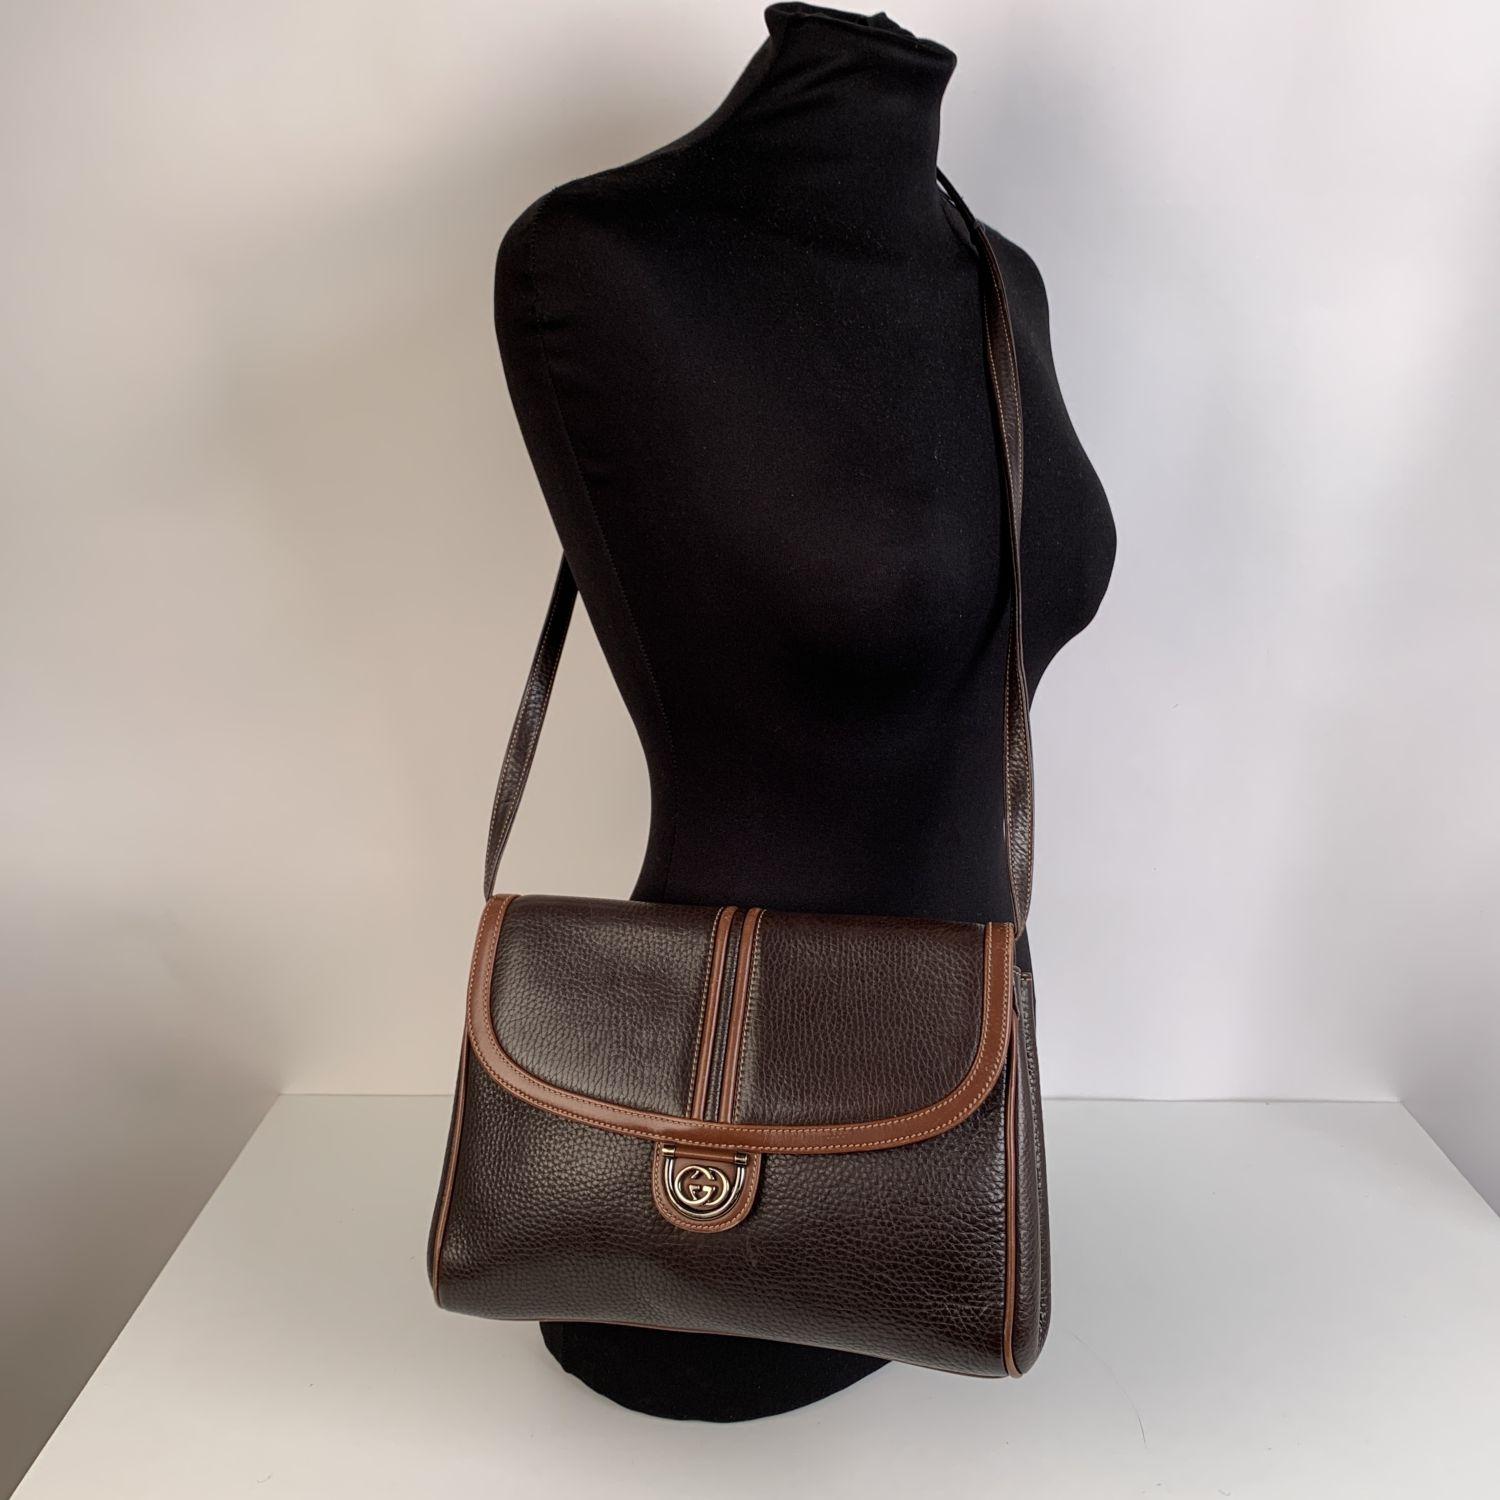 Gucci vintage brown leather crossbody bag. Can be used as a clutch purse if you remove its strap. Flap with magnetic button closure. GG - GUCCI logo on the front. Brown suede lining. 1 side zip pocket inside. Removable and adjustable shoulder strap.